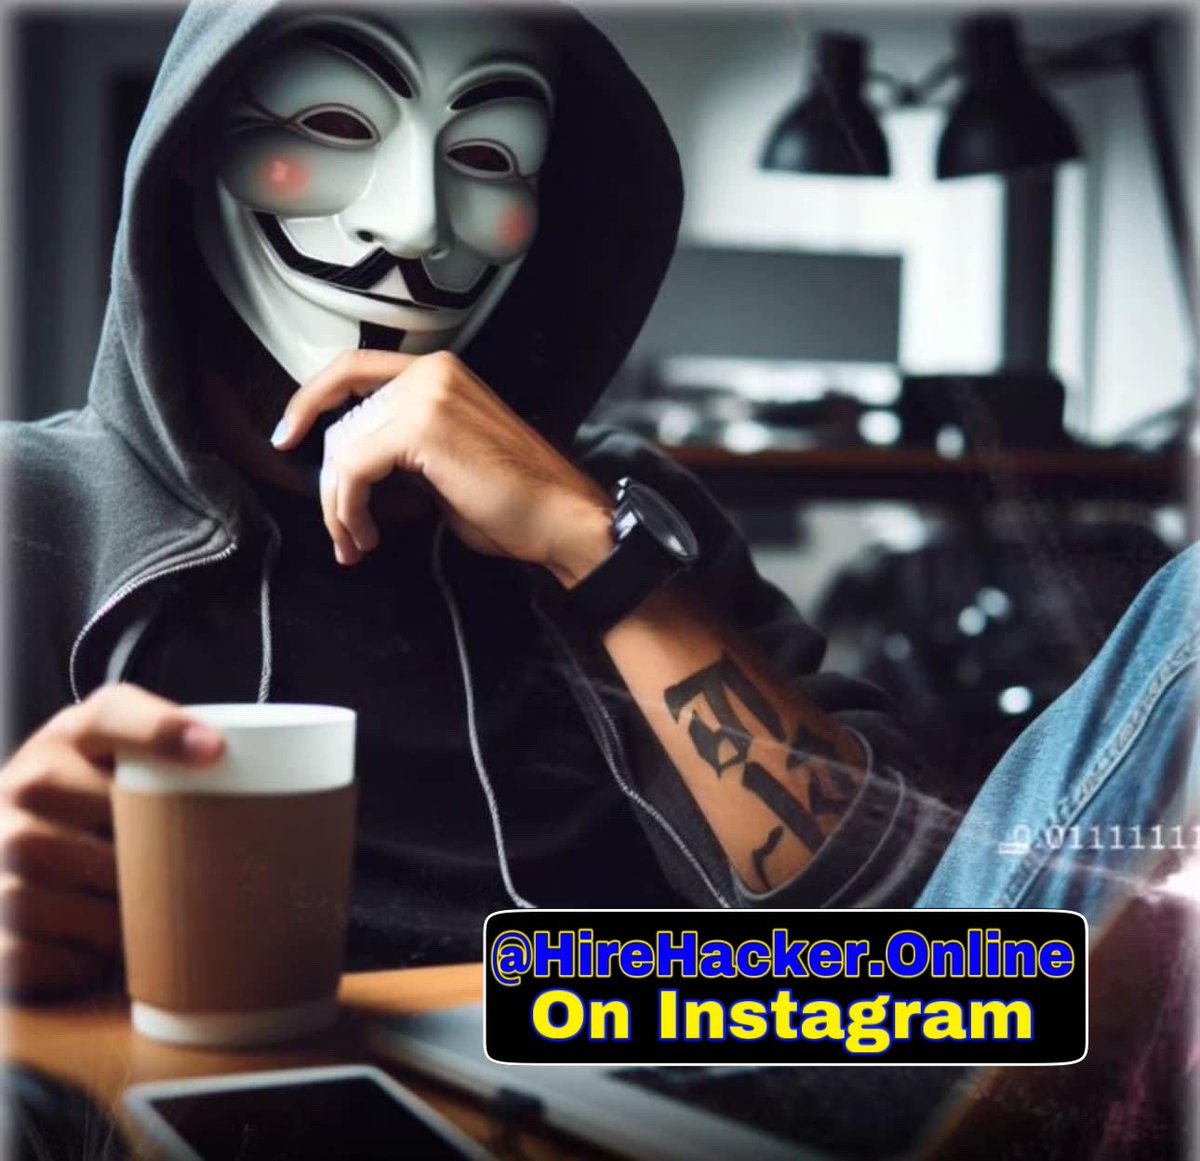 Send a message on Instagram @hirehacker.online For All kind of Hacking & Recovery Service

#hacker #hacking #cheatingpartner #accountgothacked #accounthacking #accounthack #gothacked #instagramdisabled #instagramhacked #instagramhacker #instagramrecovery #instagramhack #phonehack